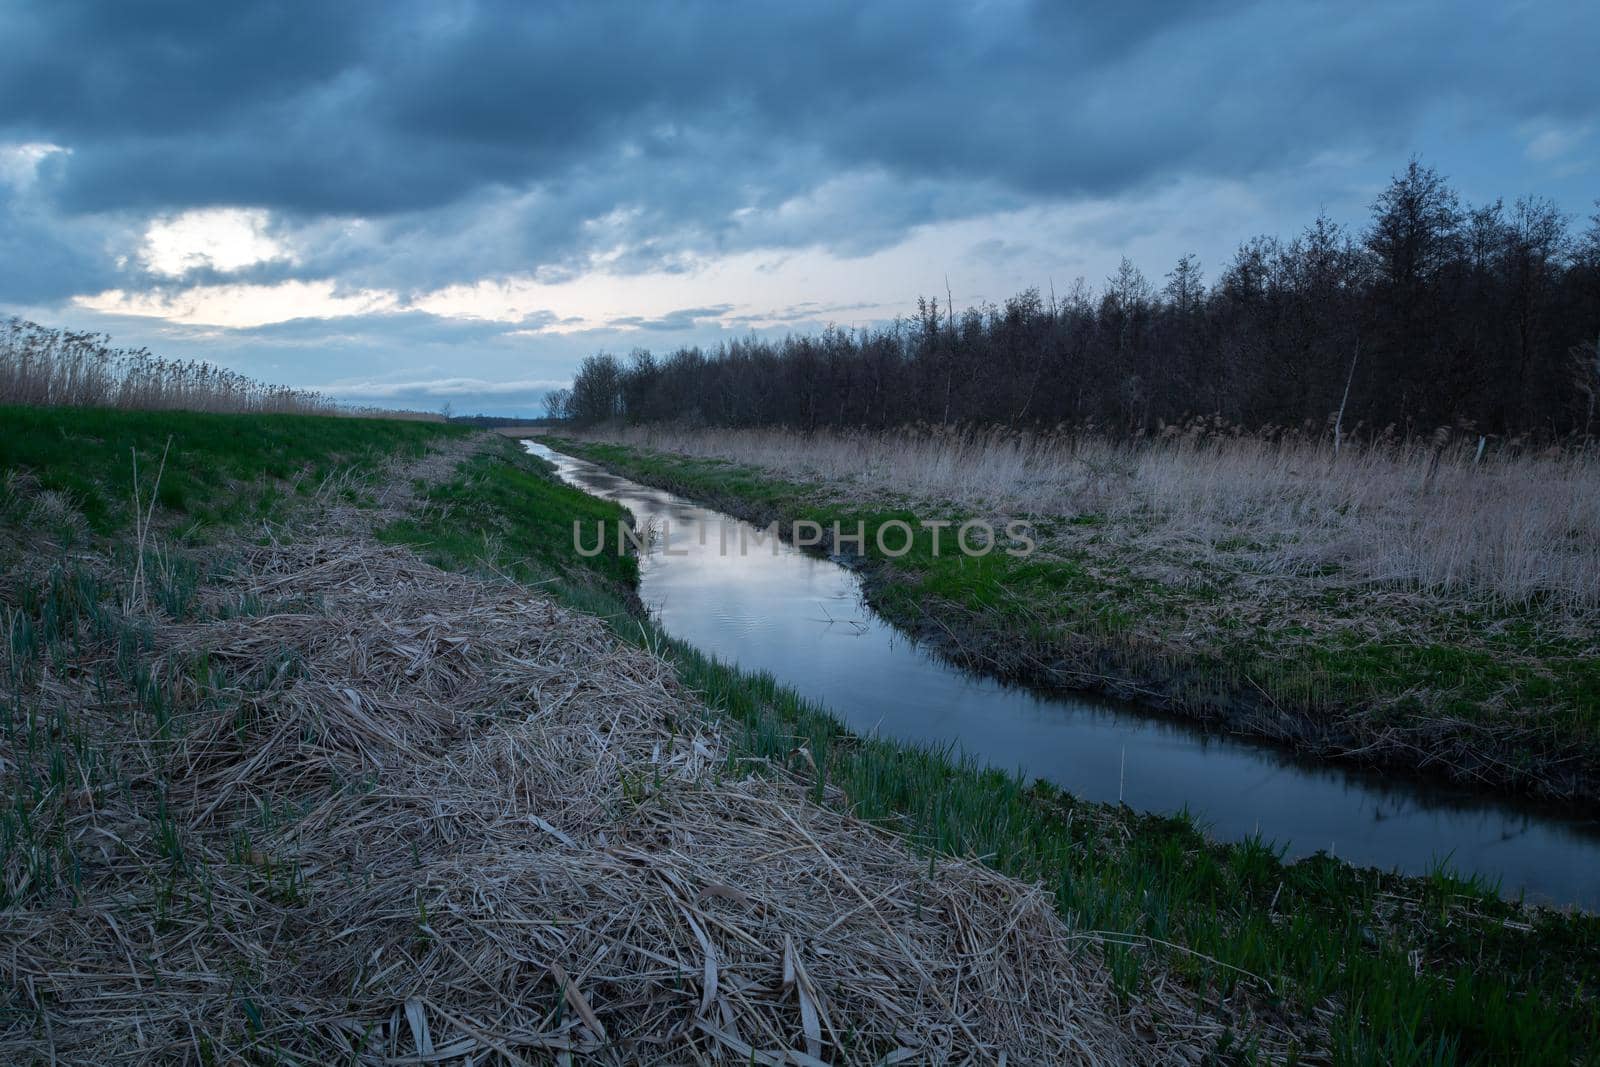 The Uherka river near the forest in eastern Poland, Stankow